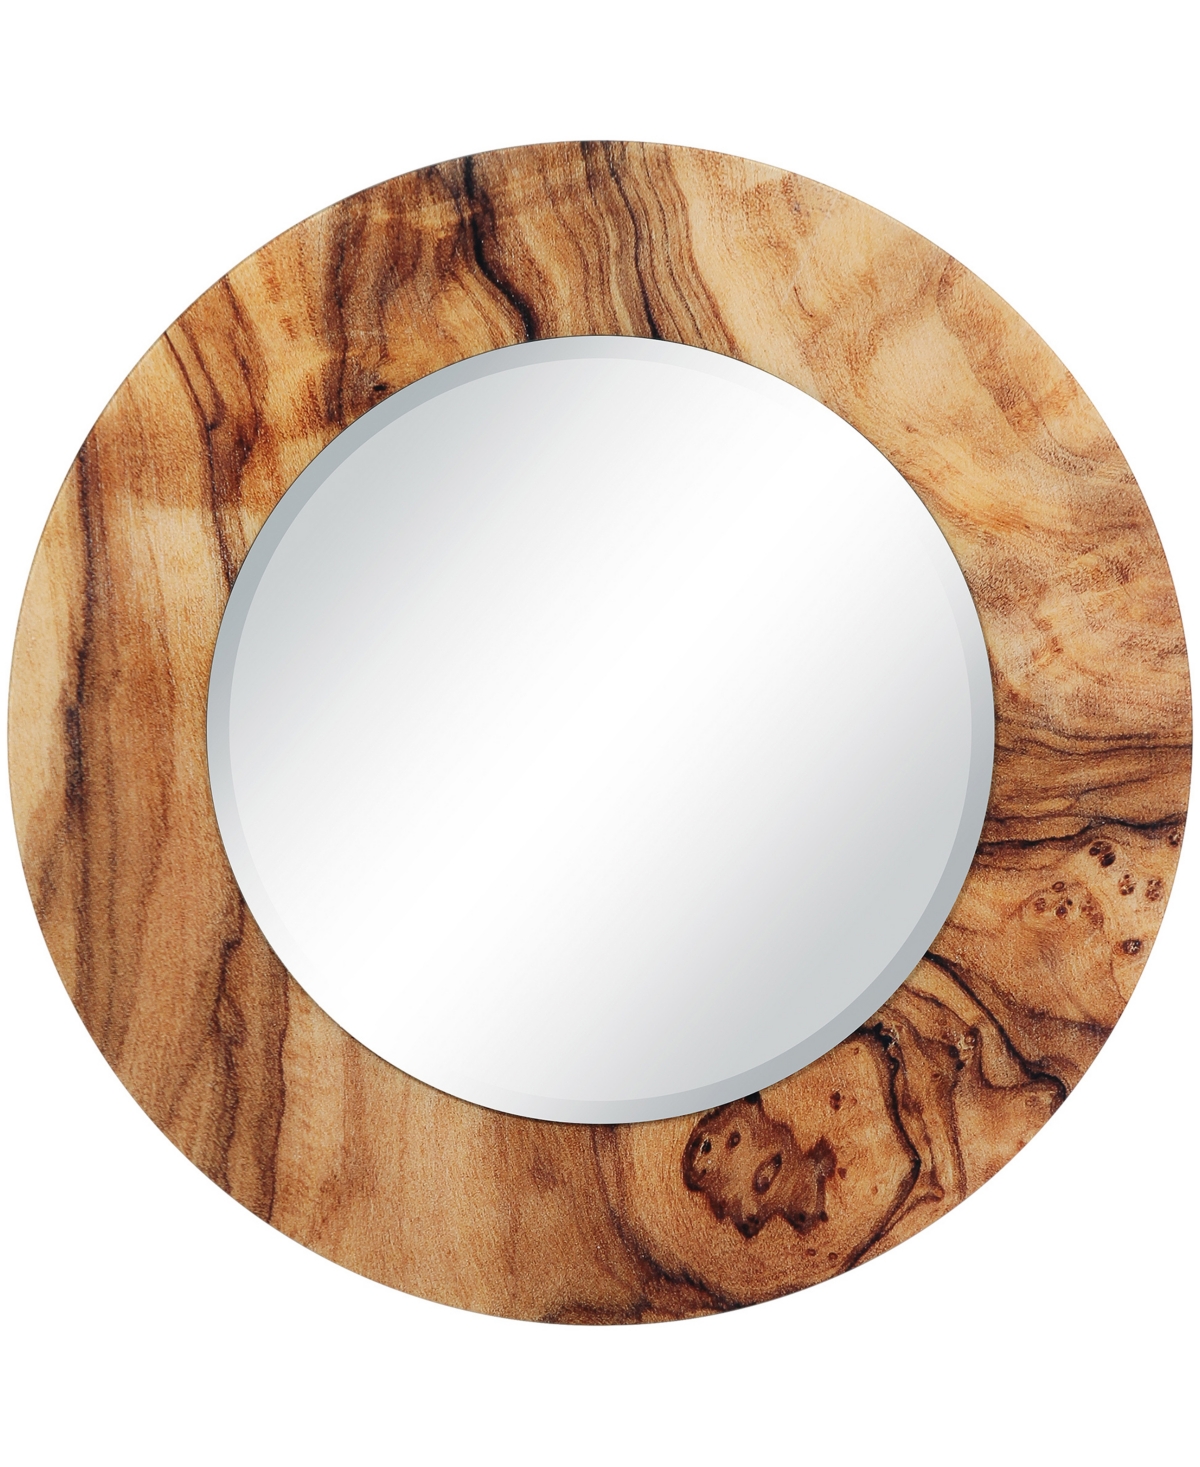 Forest Round Beveled Wall Mirror on Free Floating Reverse Printed Tempered Art Glass, 36" x 36" x 0.4" - Beige